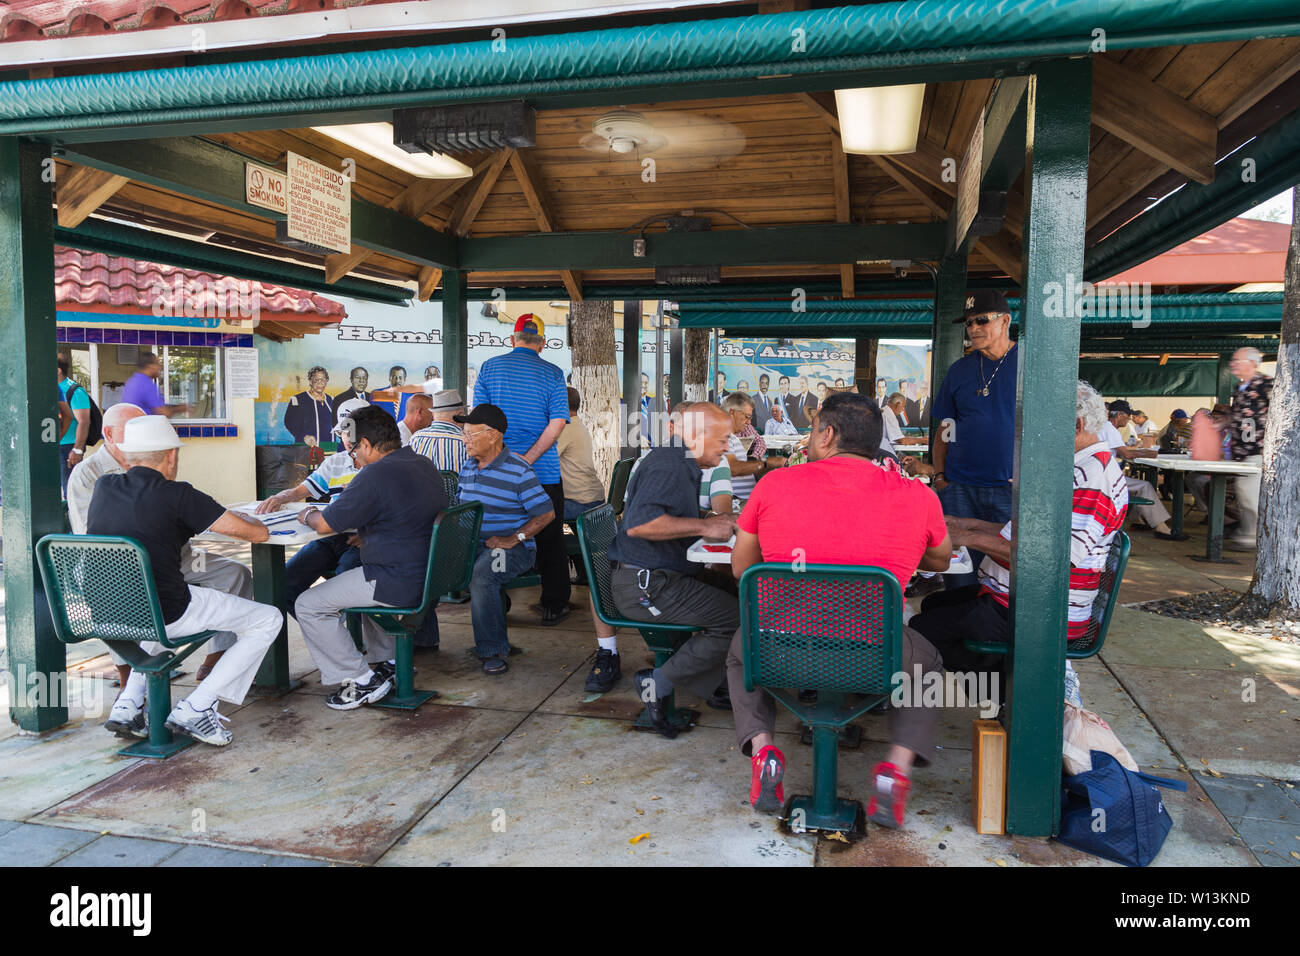 The elderly local men gather and play dominos at Maximo Gomez Park/Domino Park on Calle Ocho  in Little Havana, Miami, Florida USA. Stock Photo